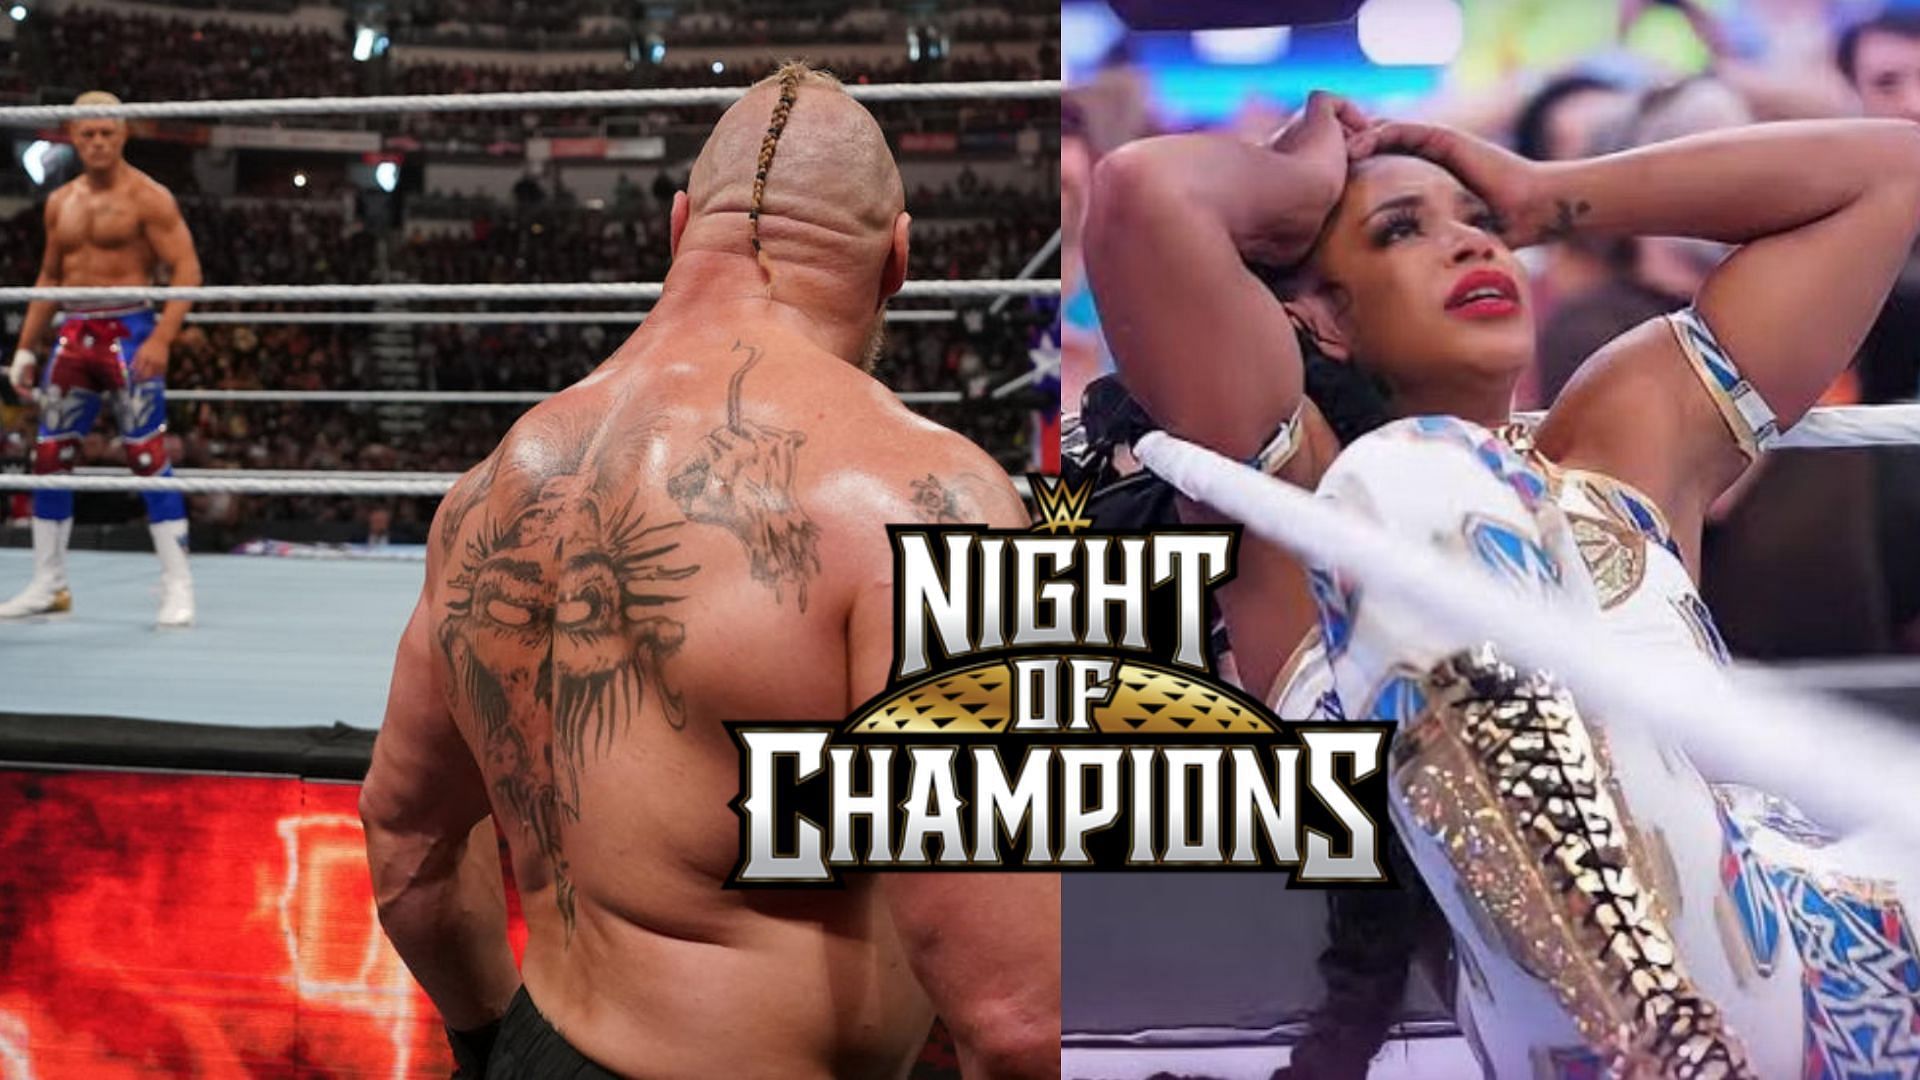 WWE Night of Champions 2023 is stacked with three main events